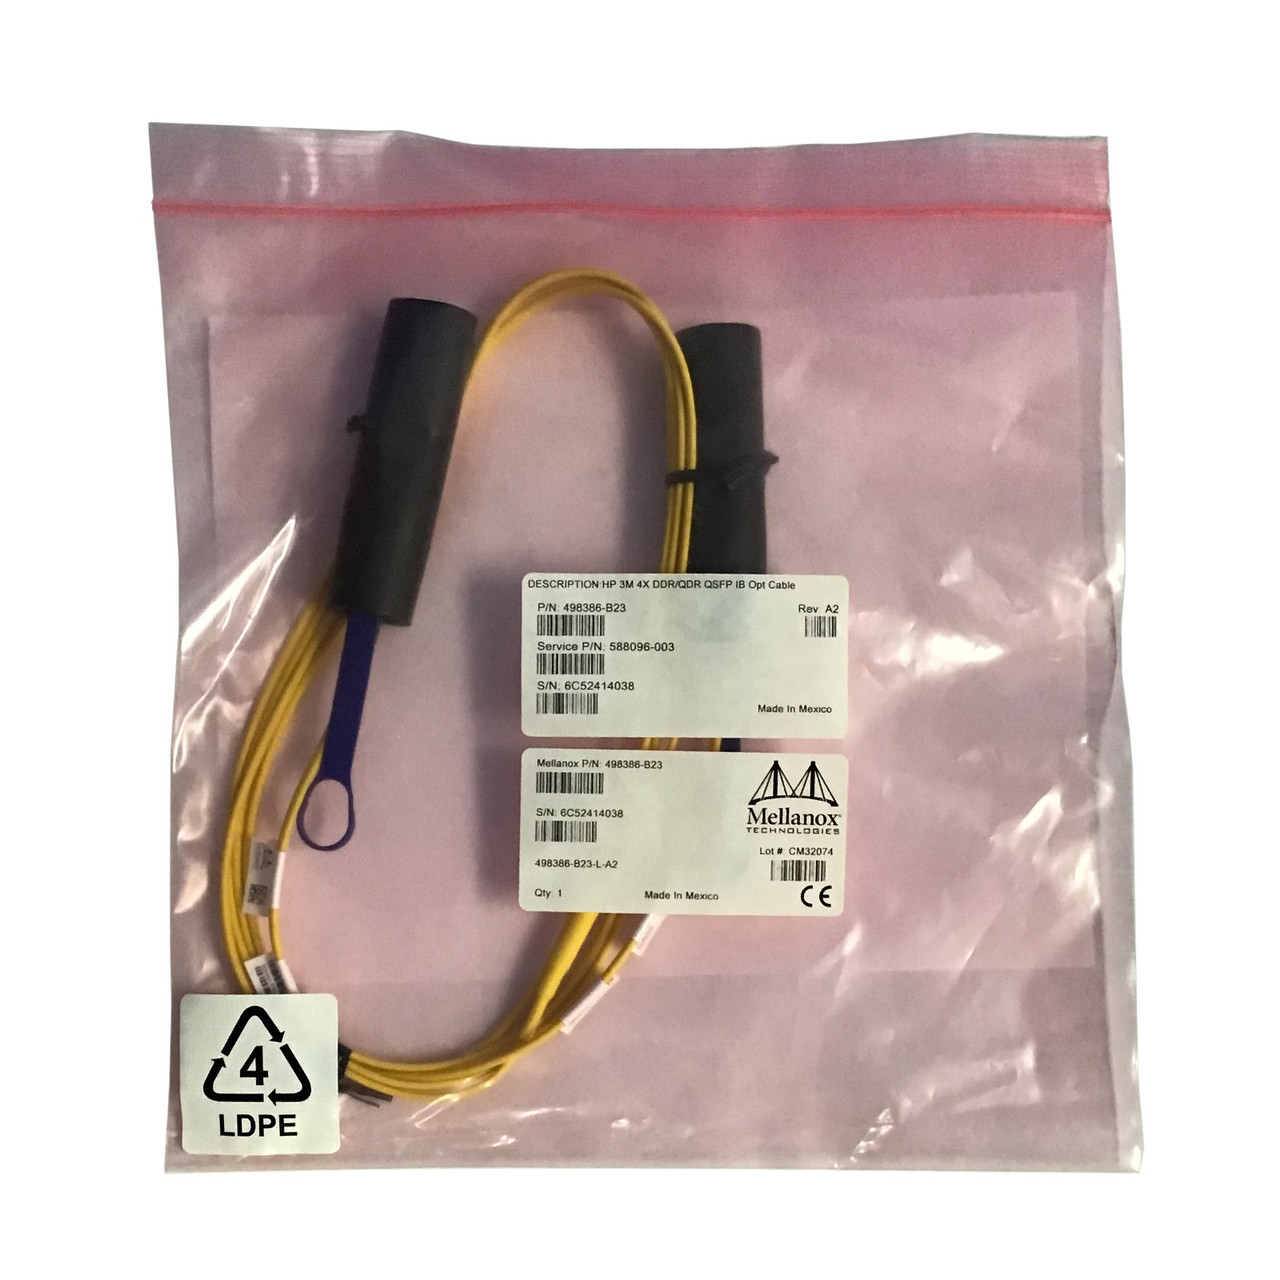 HP 498386-B23 4 x Optical Cable 3M 588096-003